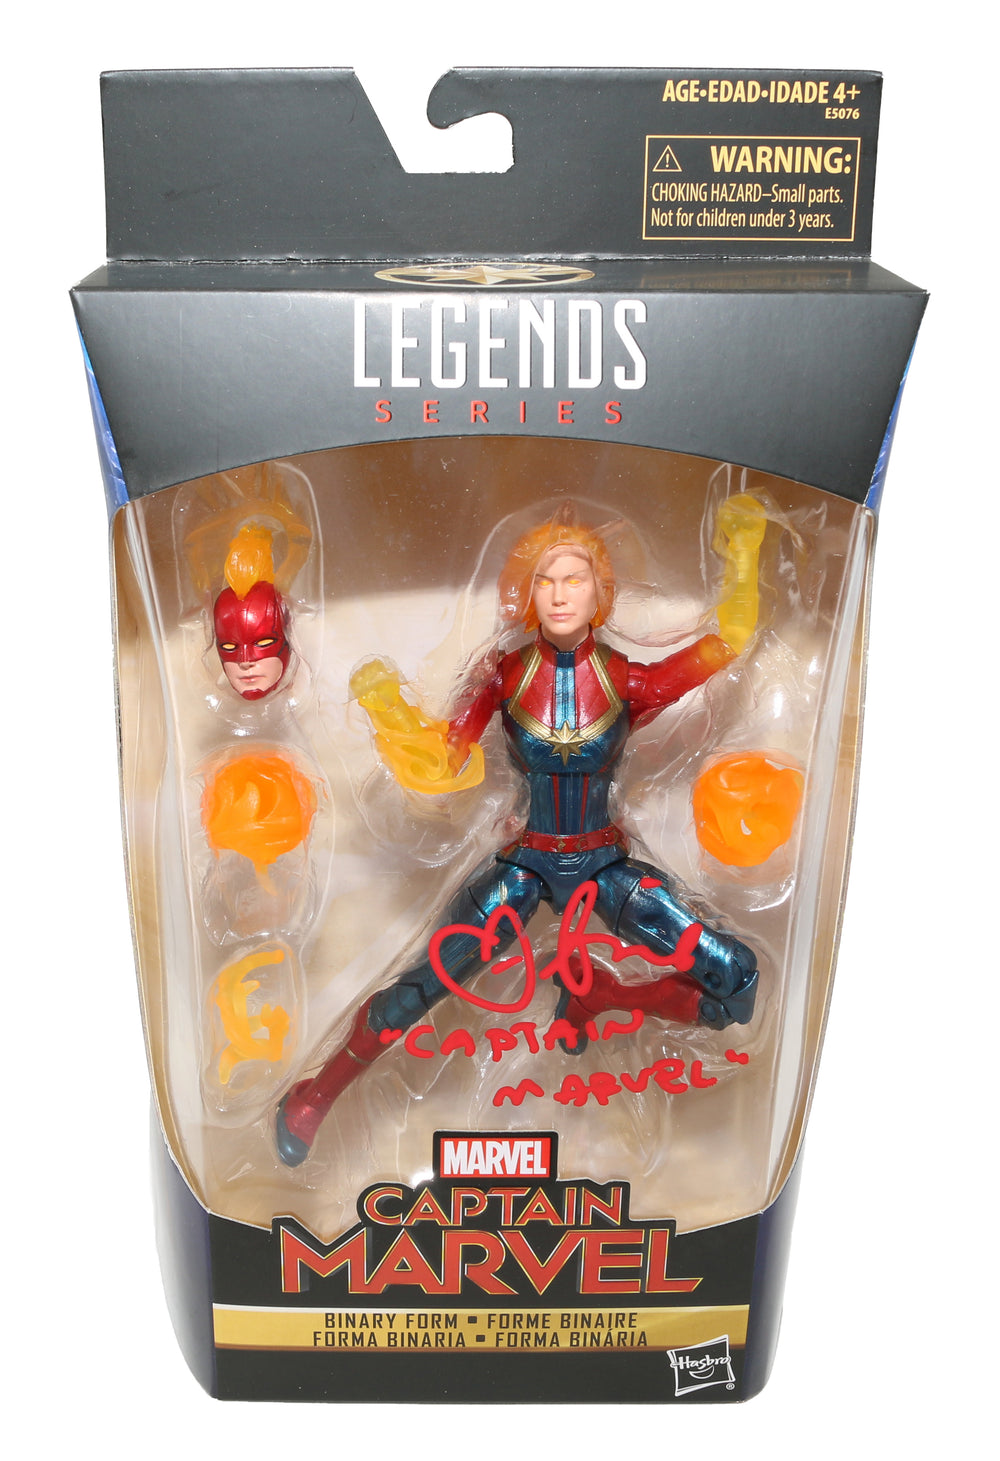 Brie Larson as Captain Marvel in Captain Marvel Signed Hasbro Legends Series Action Figure with Character Name